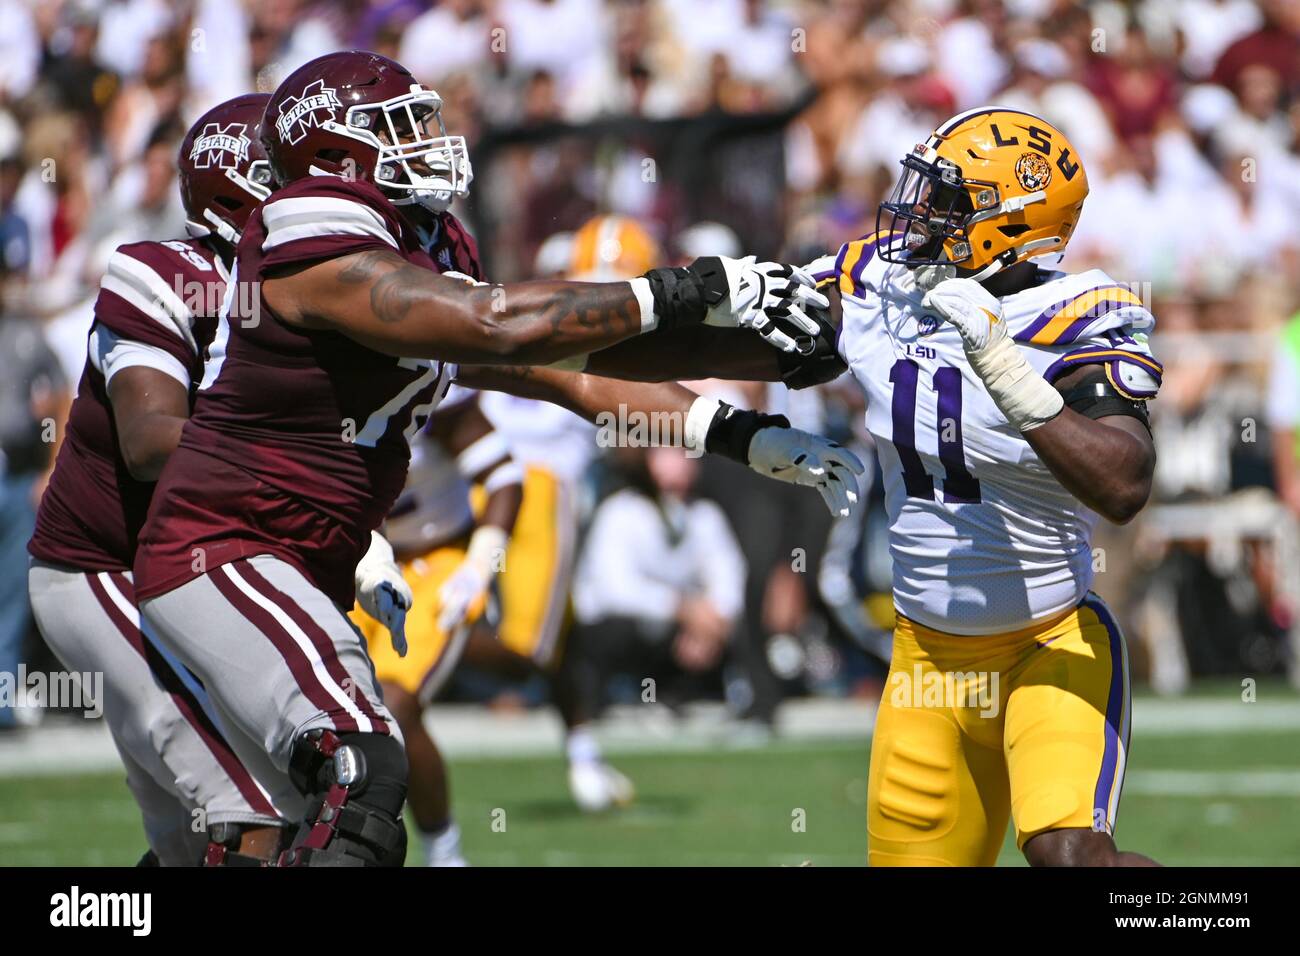 Starkville, MS, USA. 25th Sep, 2021. LSU Tigers defensive end Ali Gaye (11)(right) and Mississippi State Bulldogs offensive lineman Scott Lashley (78)(left) during the NCAA football game between the LSU Tigers and the Mississippi State Bulldogs at Davis Wade Stadium in Starkville, MS. Kevin Langley/CSM/Alamy Live News Stock Photo